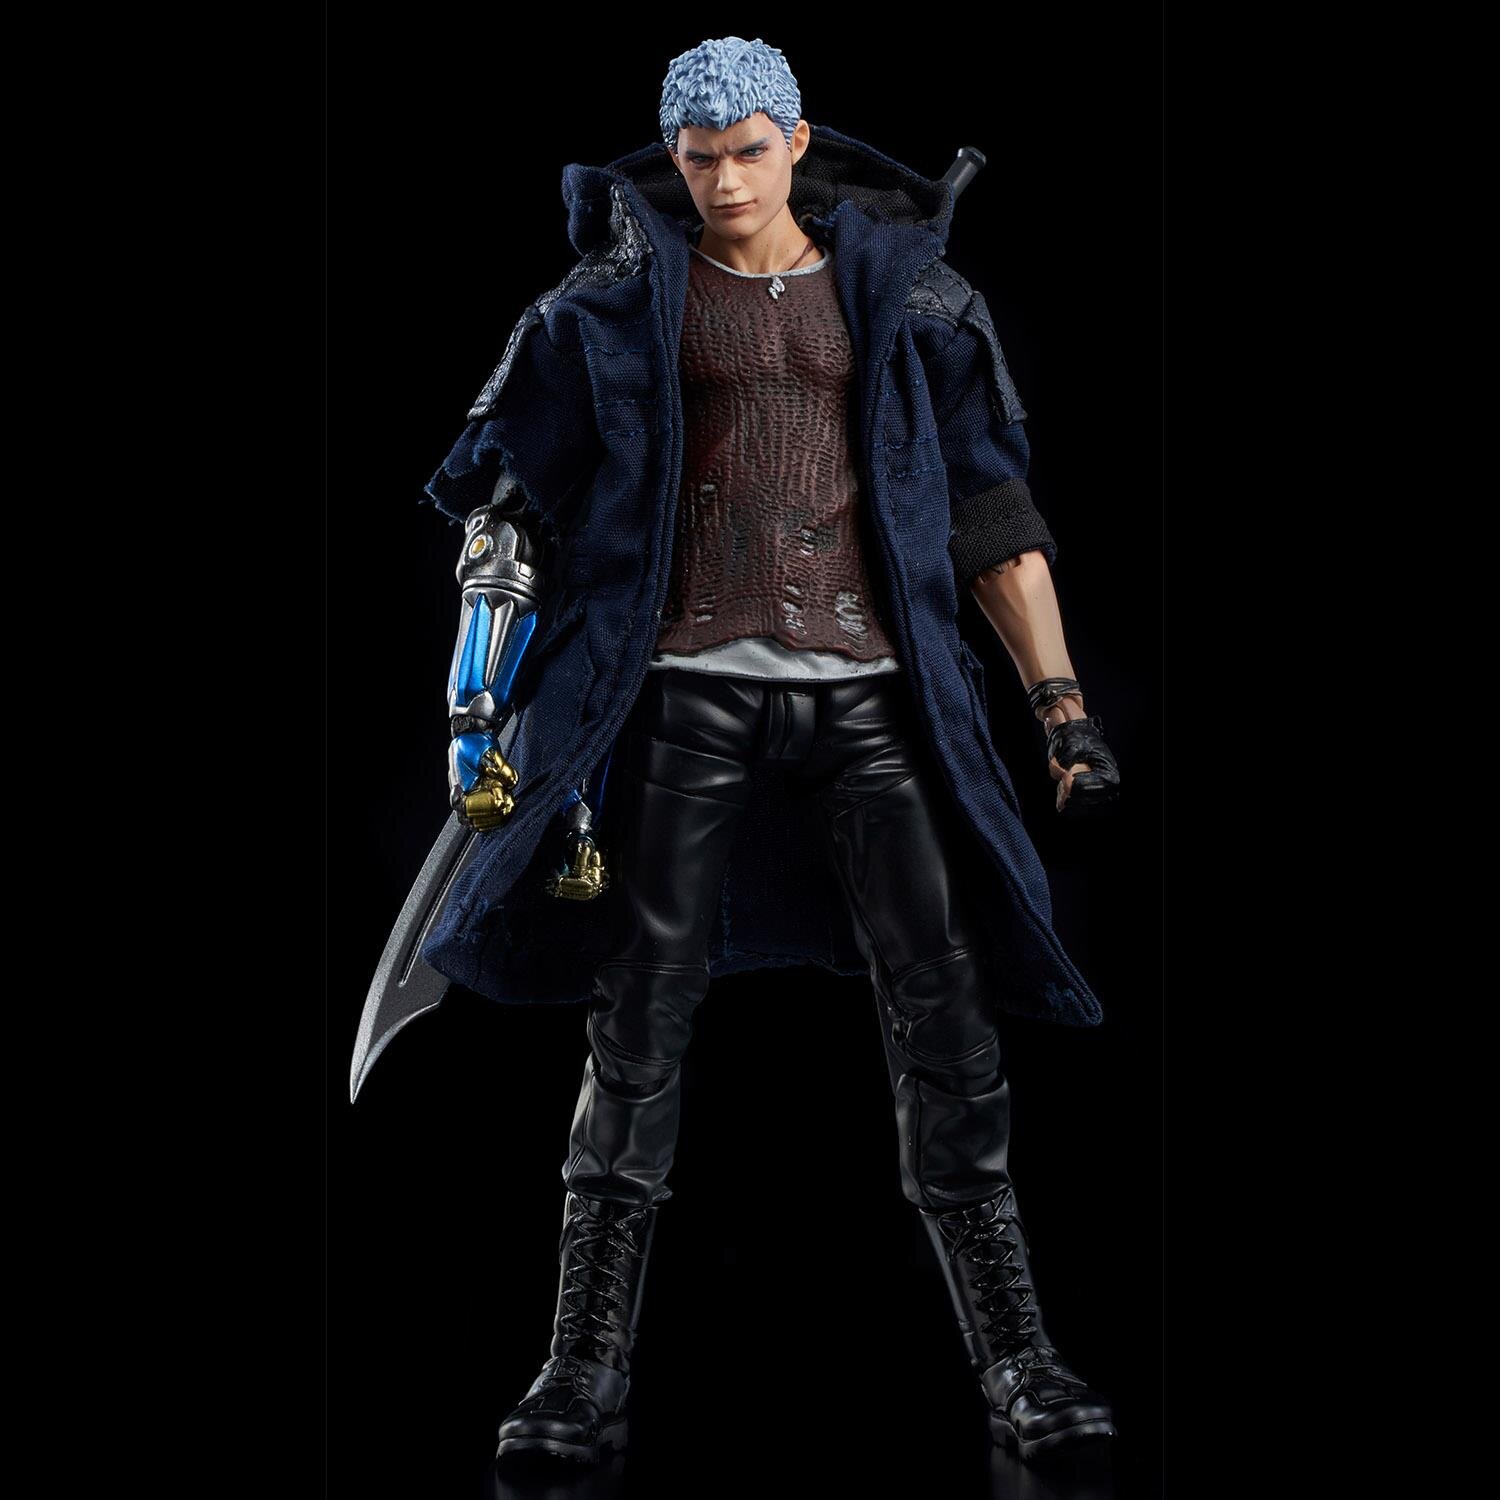 1000-toys-Devil-May-Cry-5-Nero-Action-Figure-Deluxe-Version-19.jpg